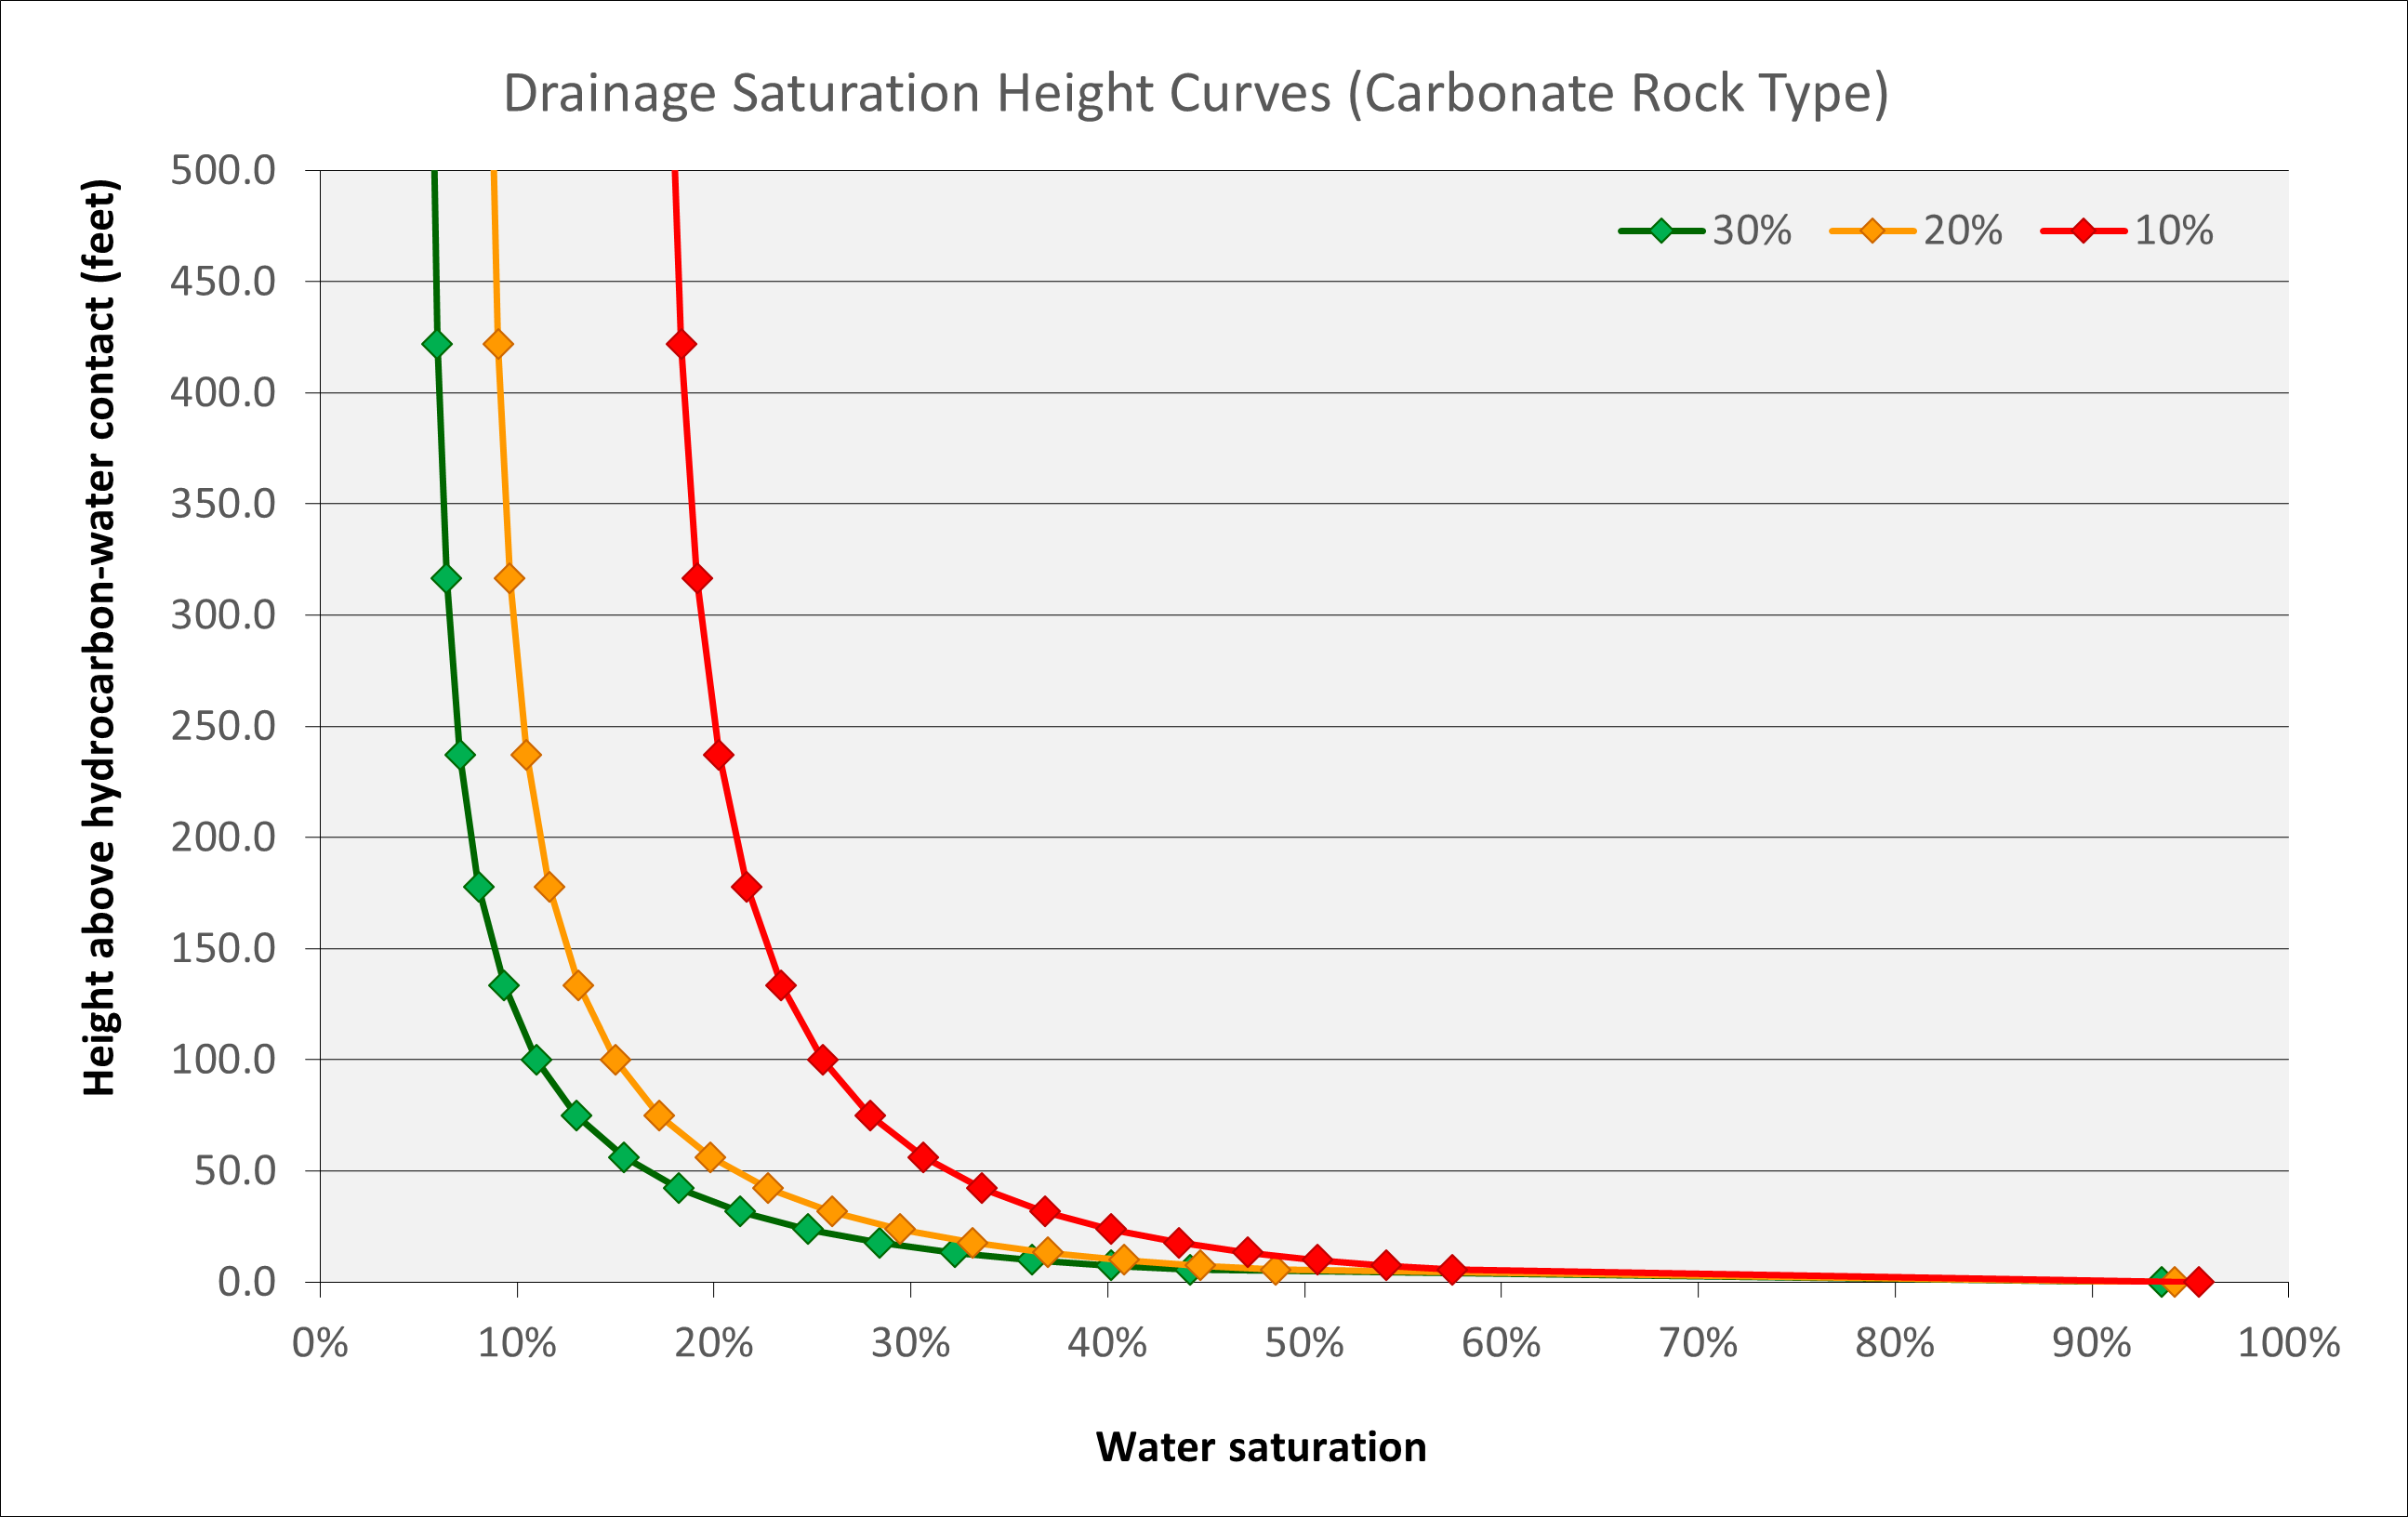 Saturation height function for gas-water system in high permeability carbonate showing influence of porosity.